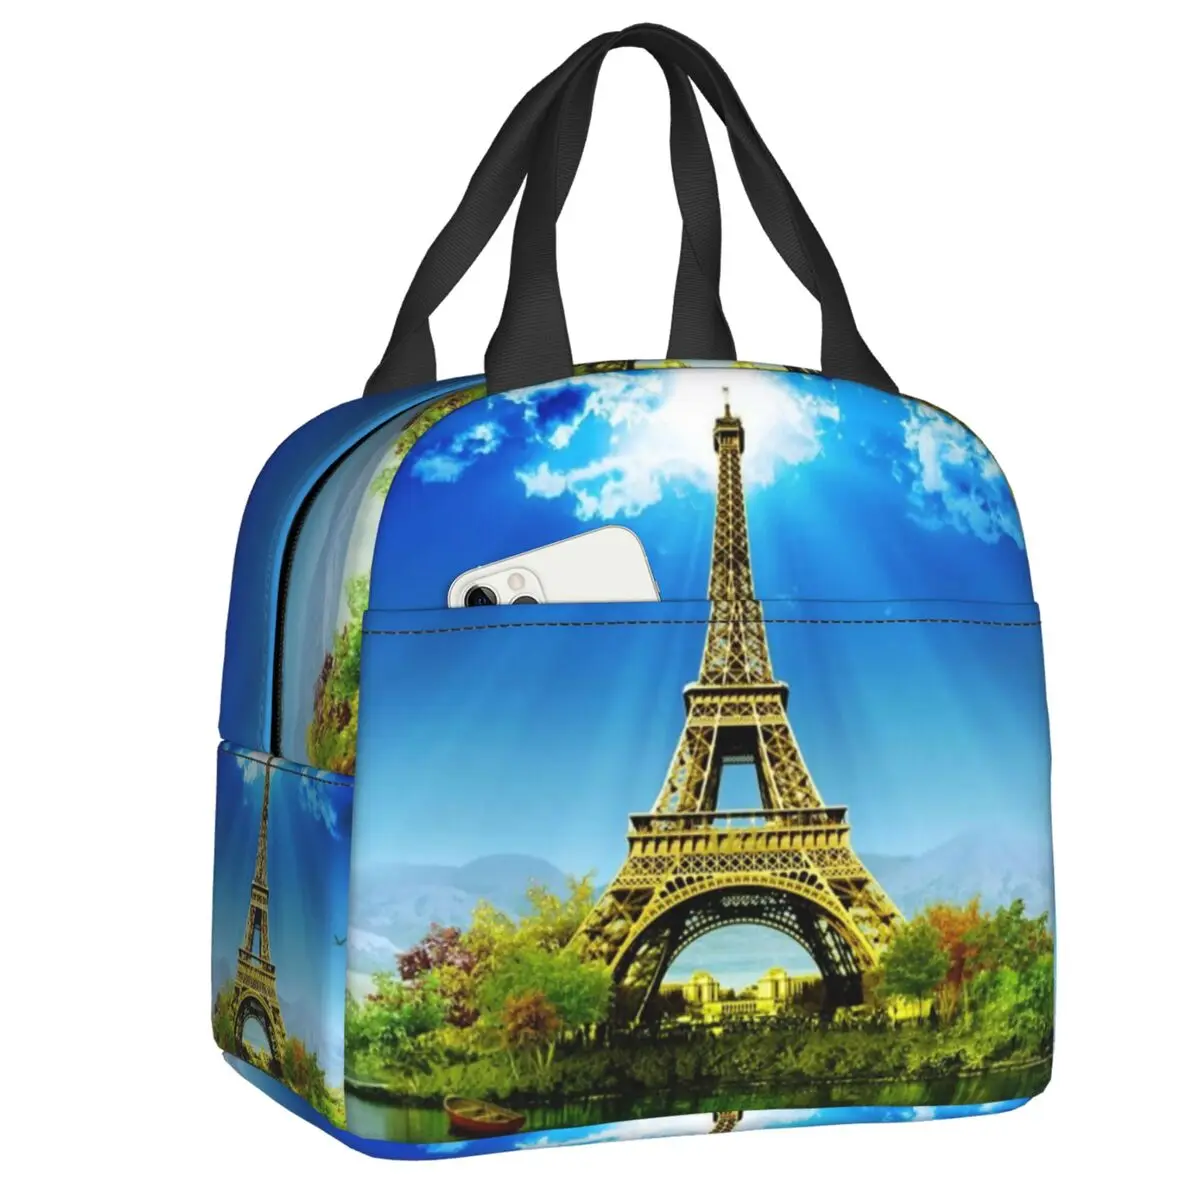 

Wonderful Eiffel Tower Insulated Lunch Bag for Work School Romantic France Leakproof Cooler Thermal Lunch Box Women Kids